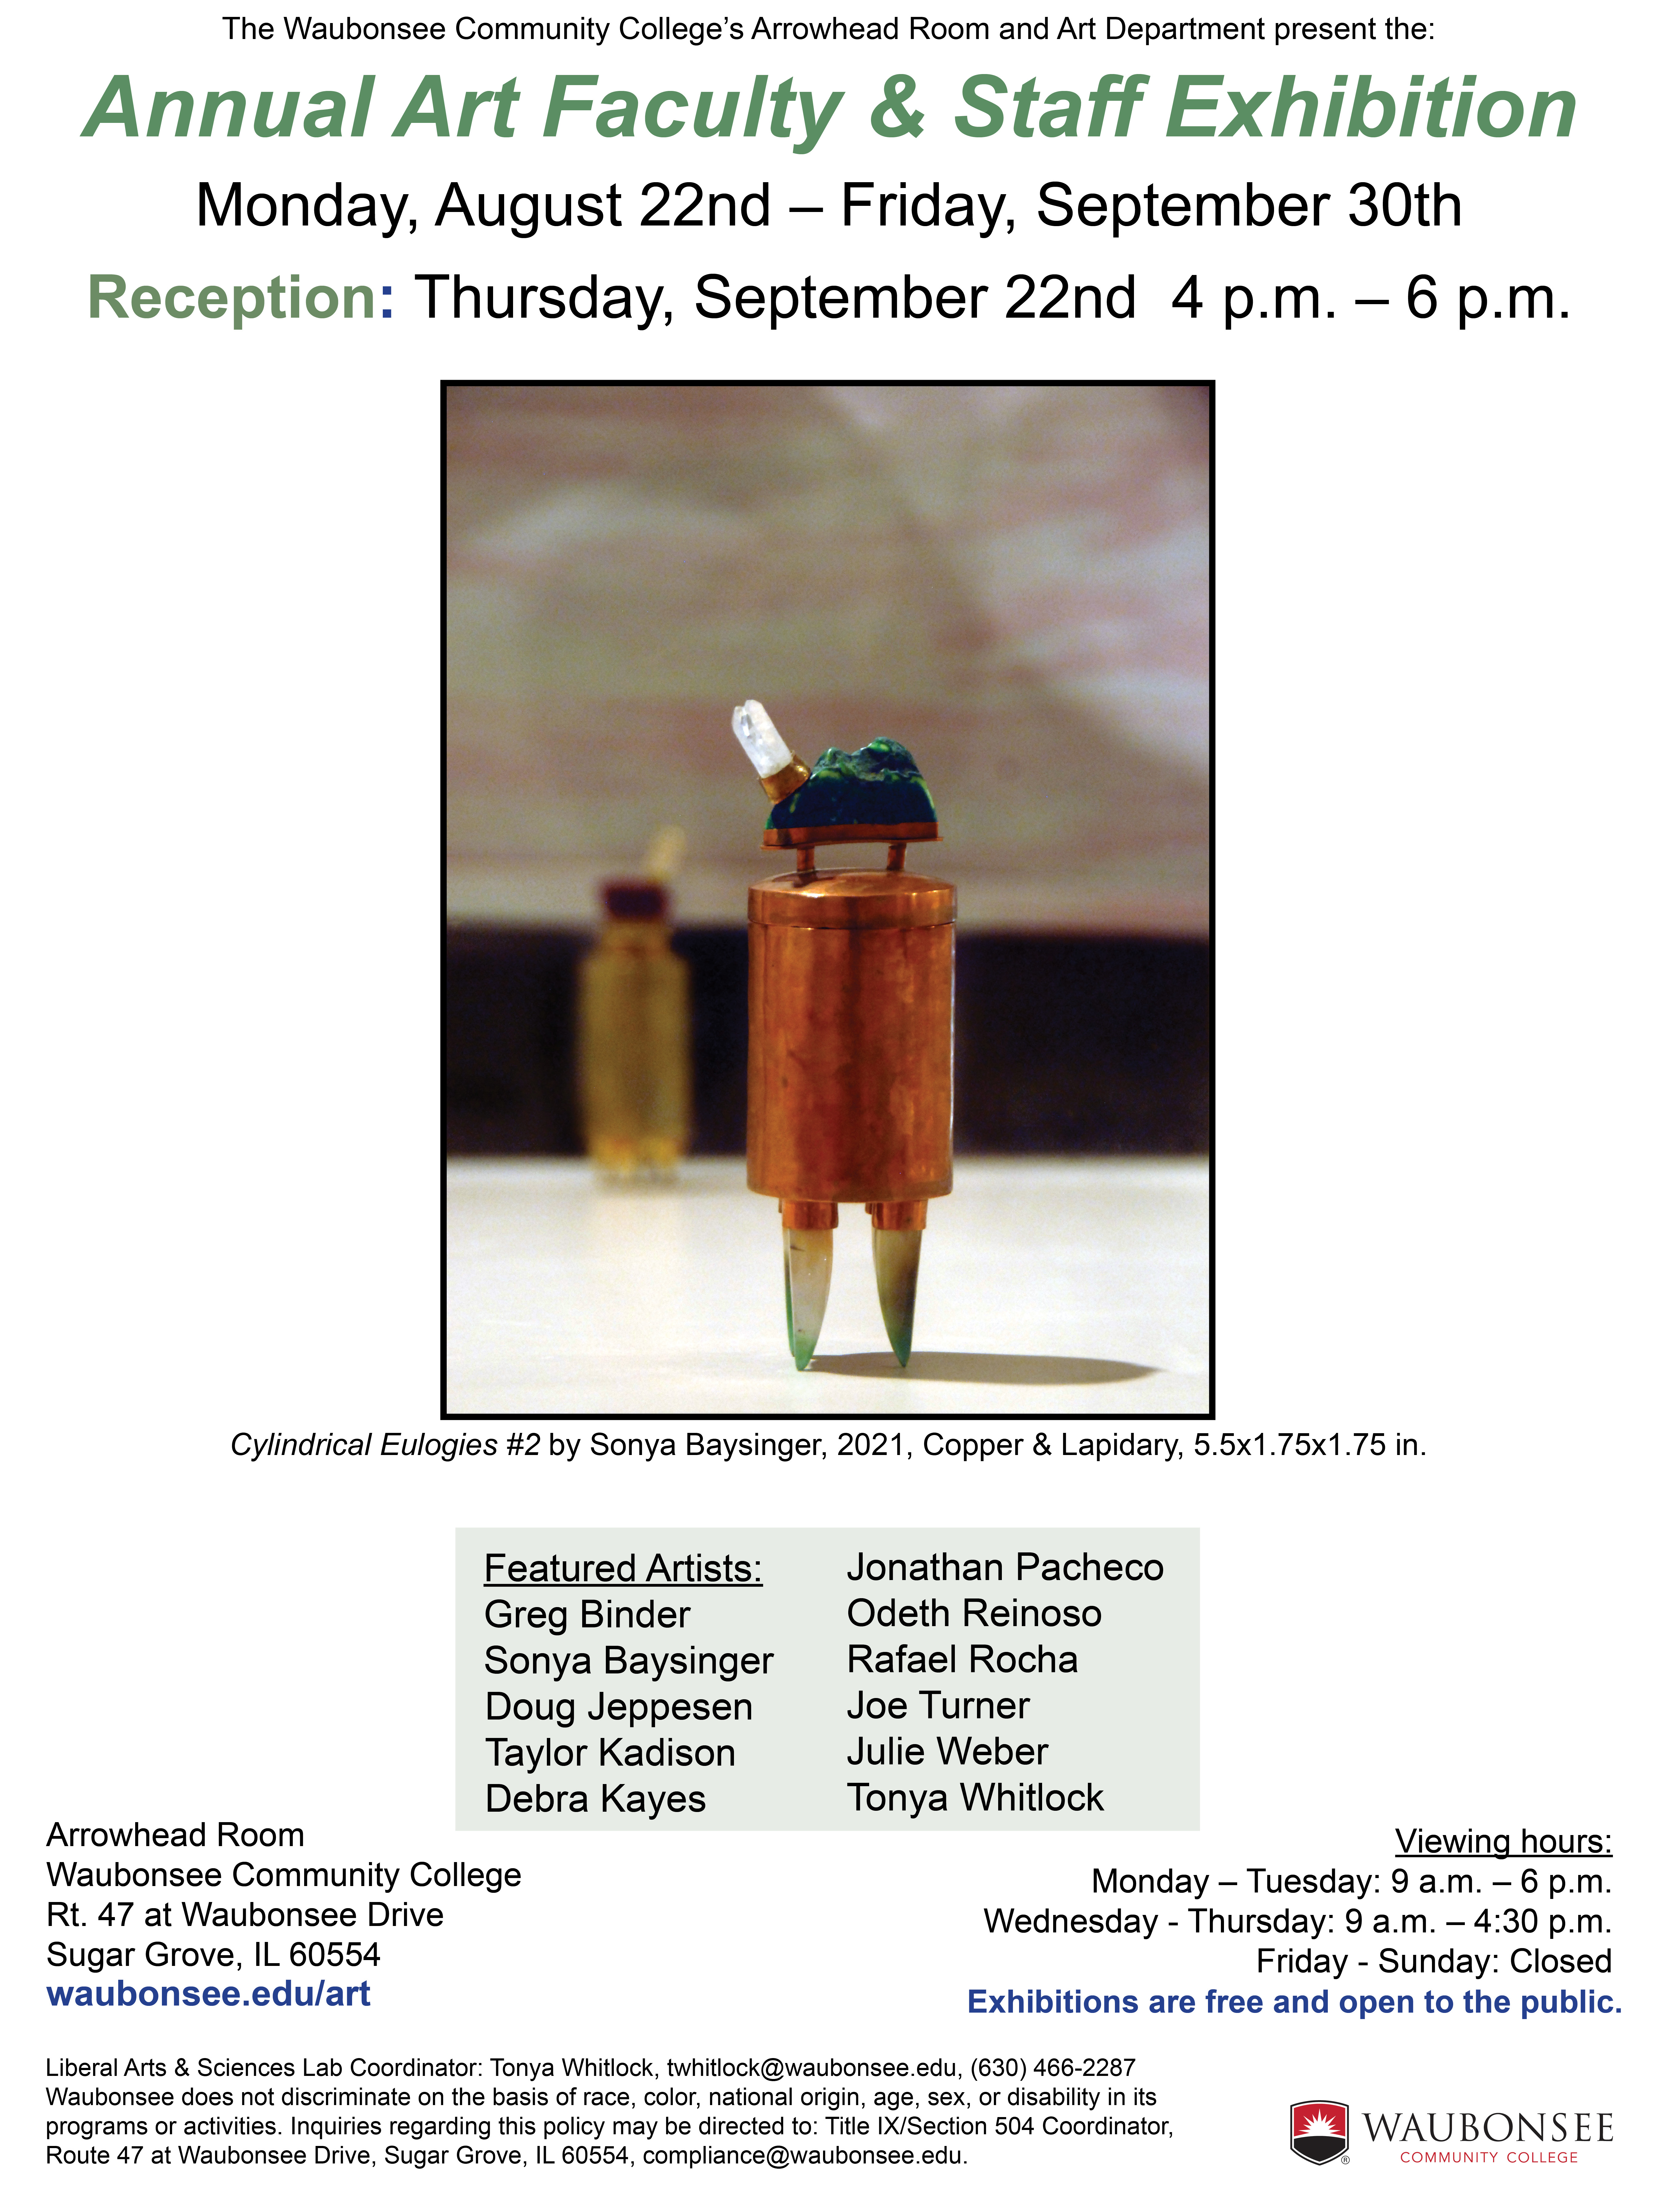 Annual Art Faculty & Staff Exhibition